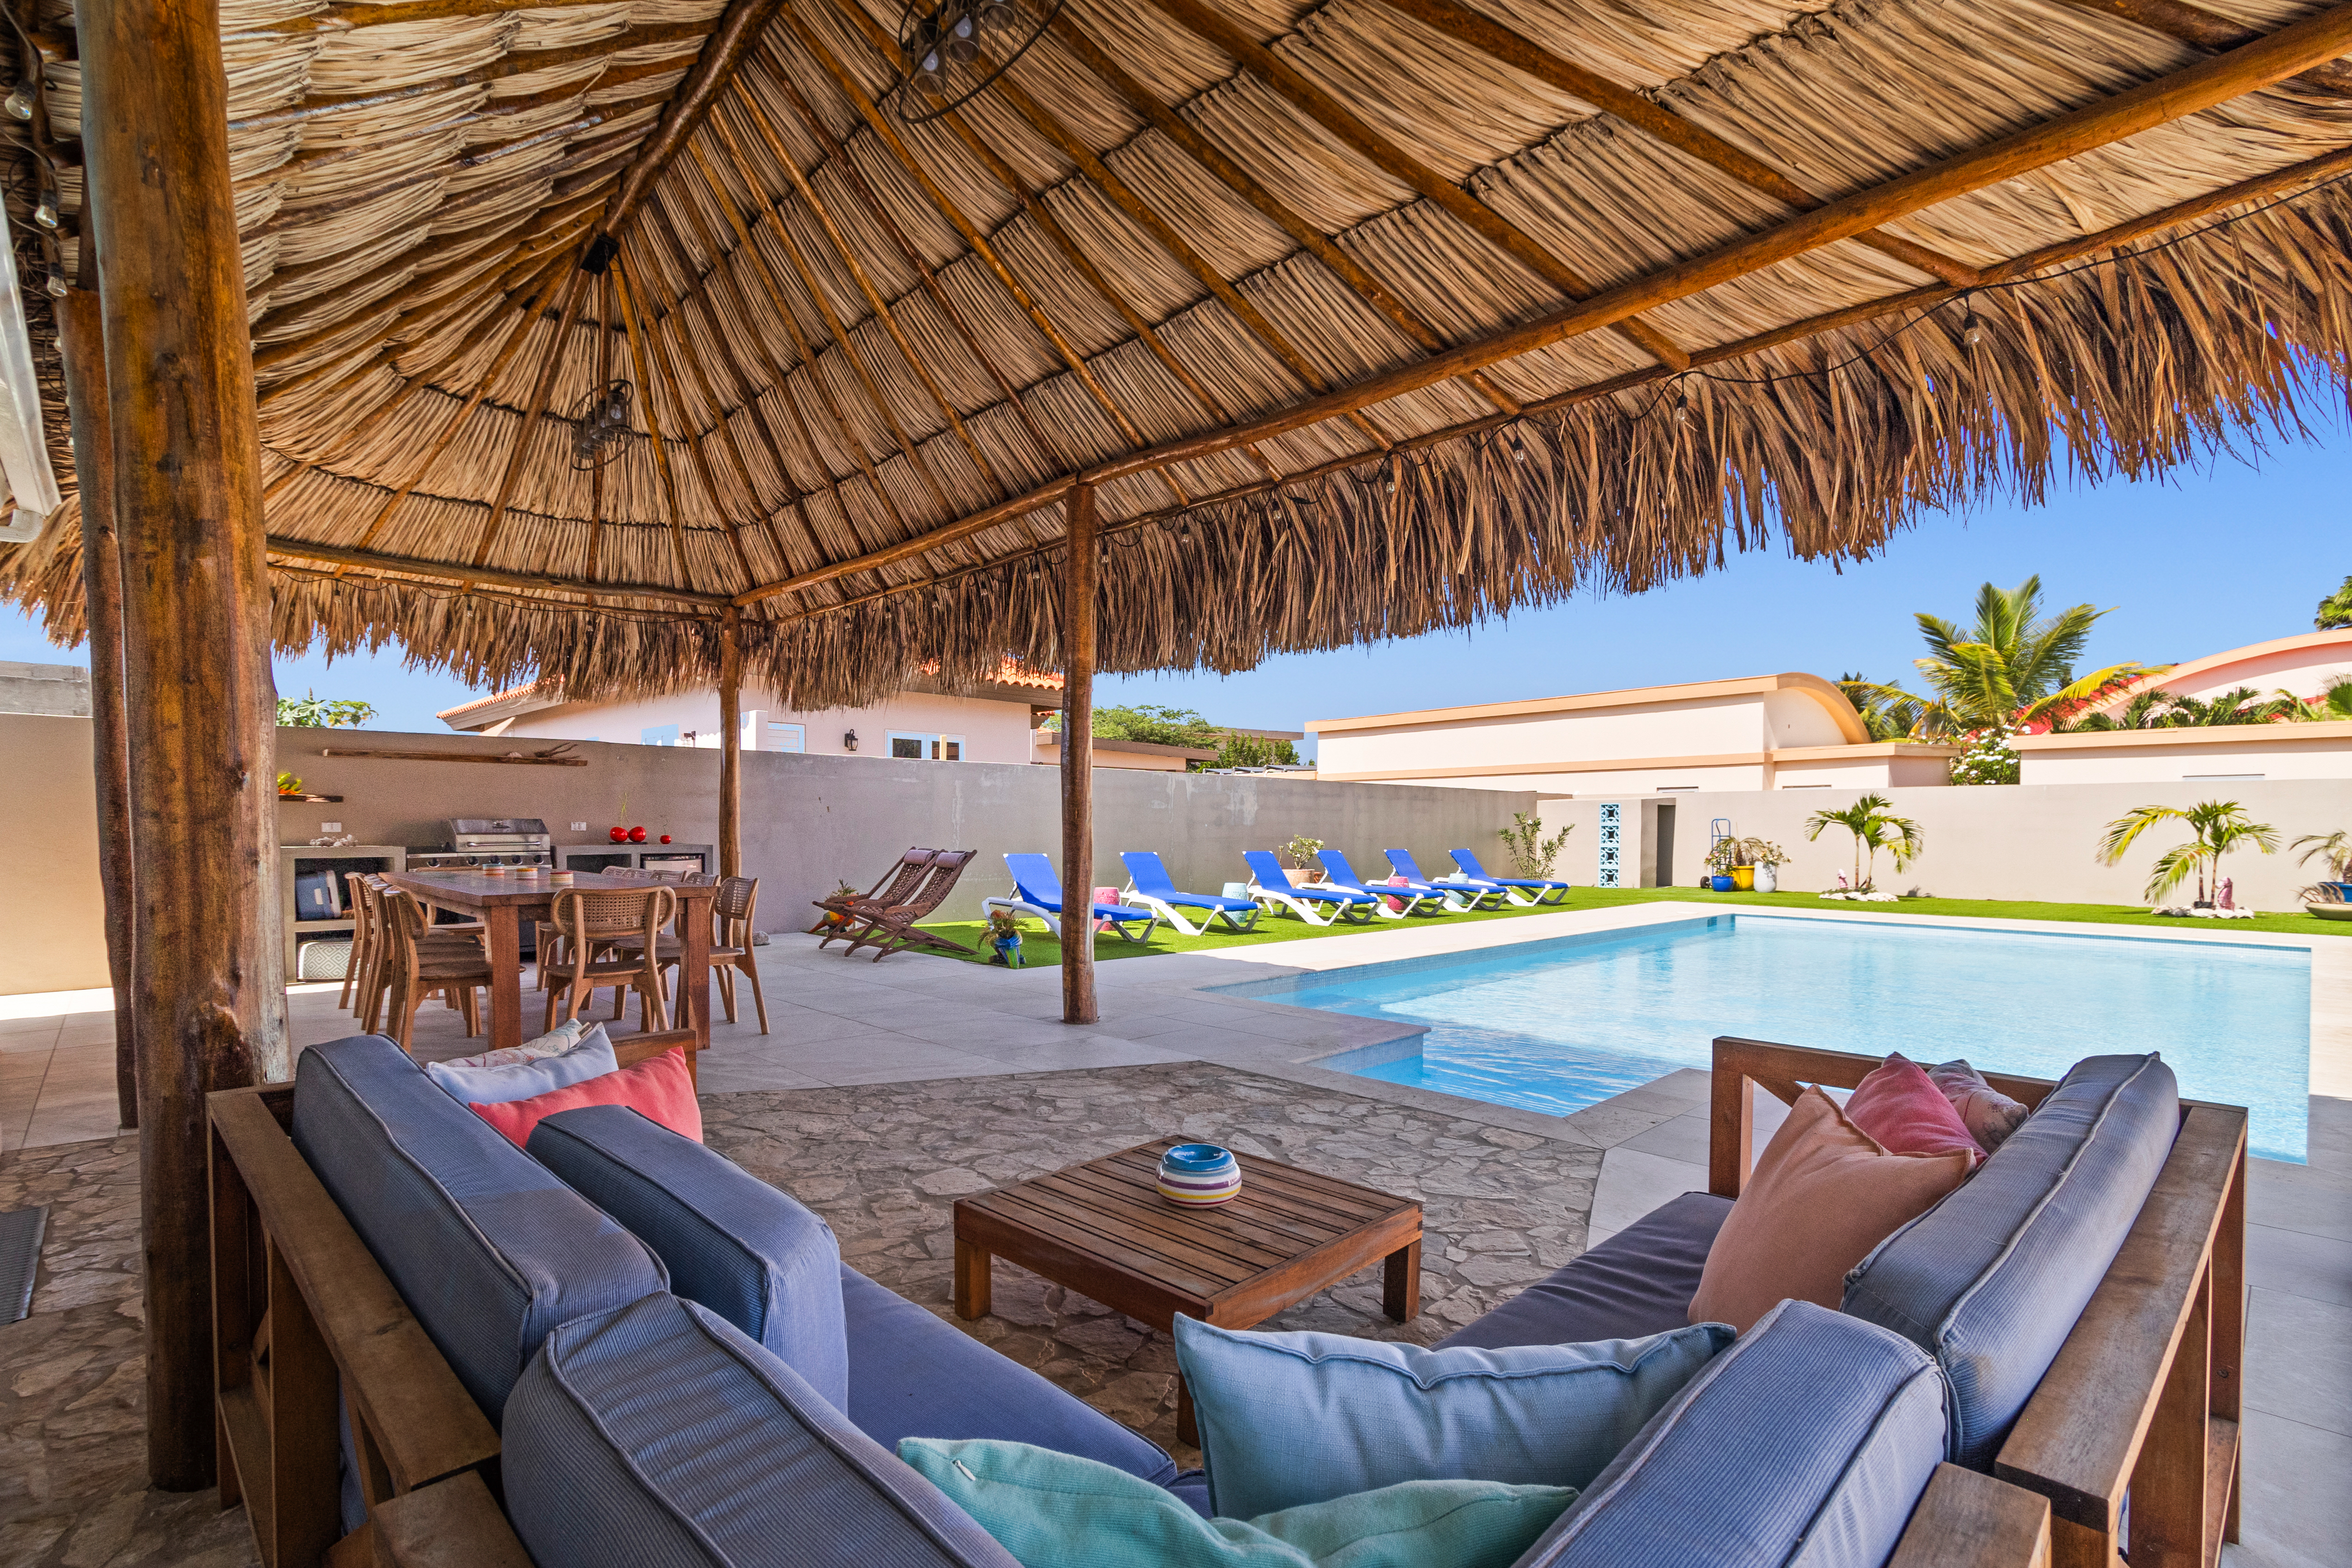 Unwind in paradise: retreat under the shade of our charming palapa beside the refreshing pool, where moments of relaxation and rejuvenation await.